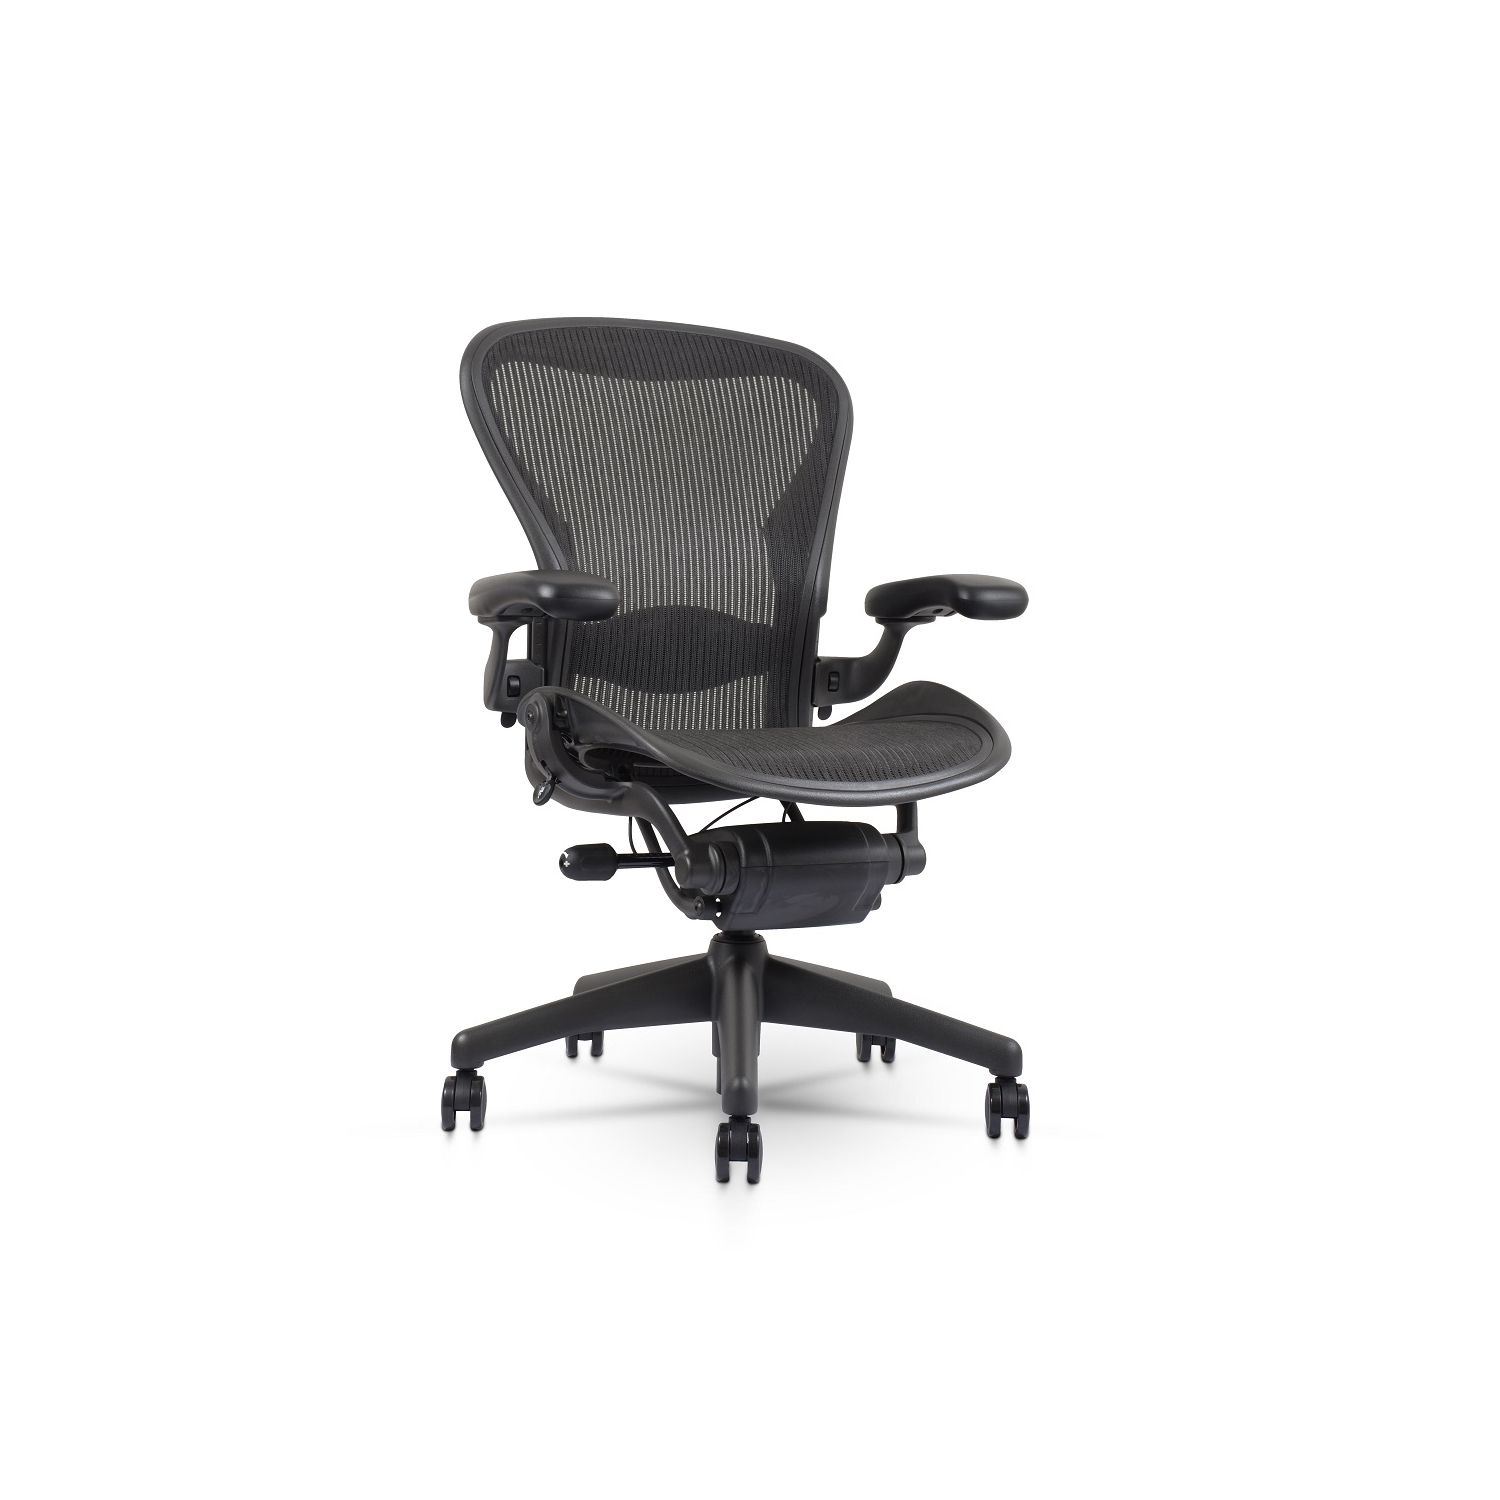 Herman Miller Classic Aeron Chair | Black | Size B | Fully Adjustable | Lumbar Support | Clip Latch| Refurbished/Renewed by Chairorama